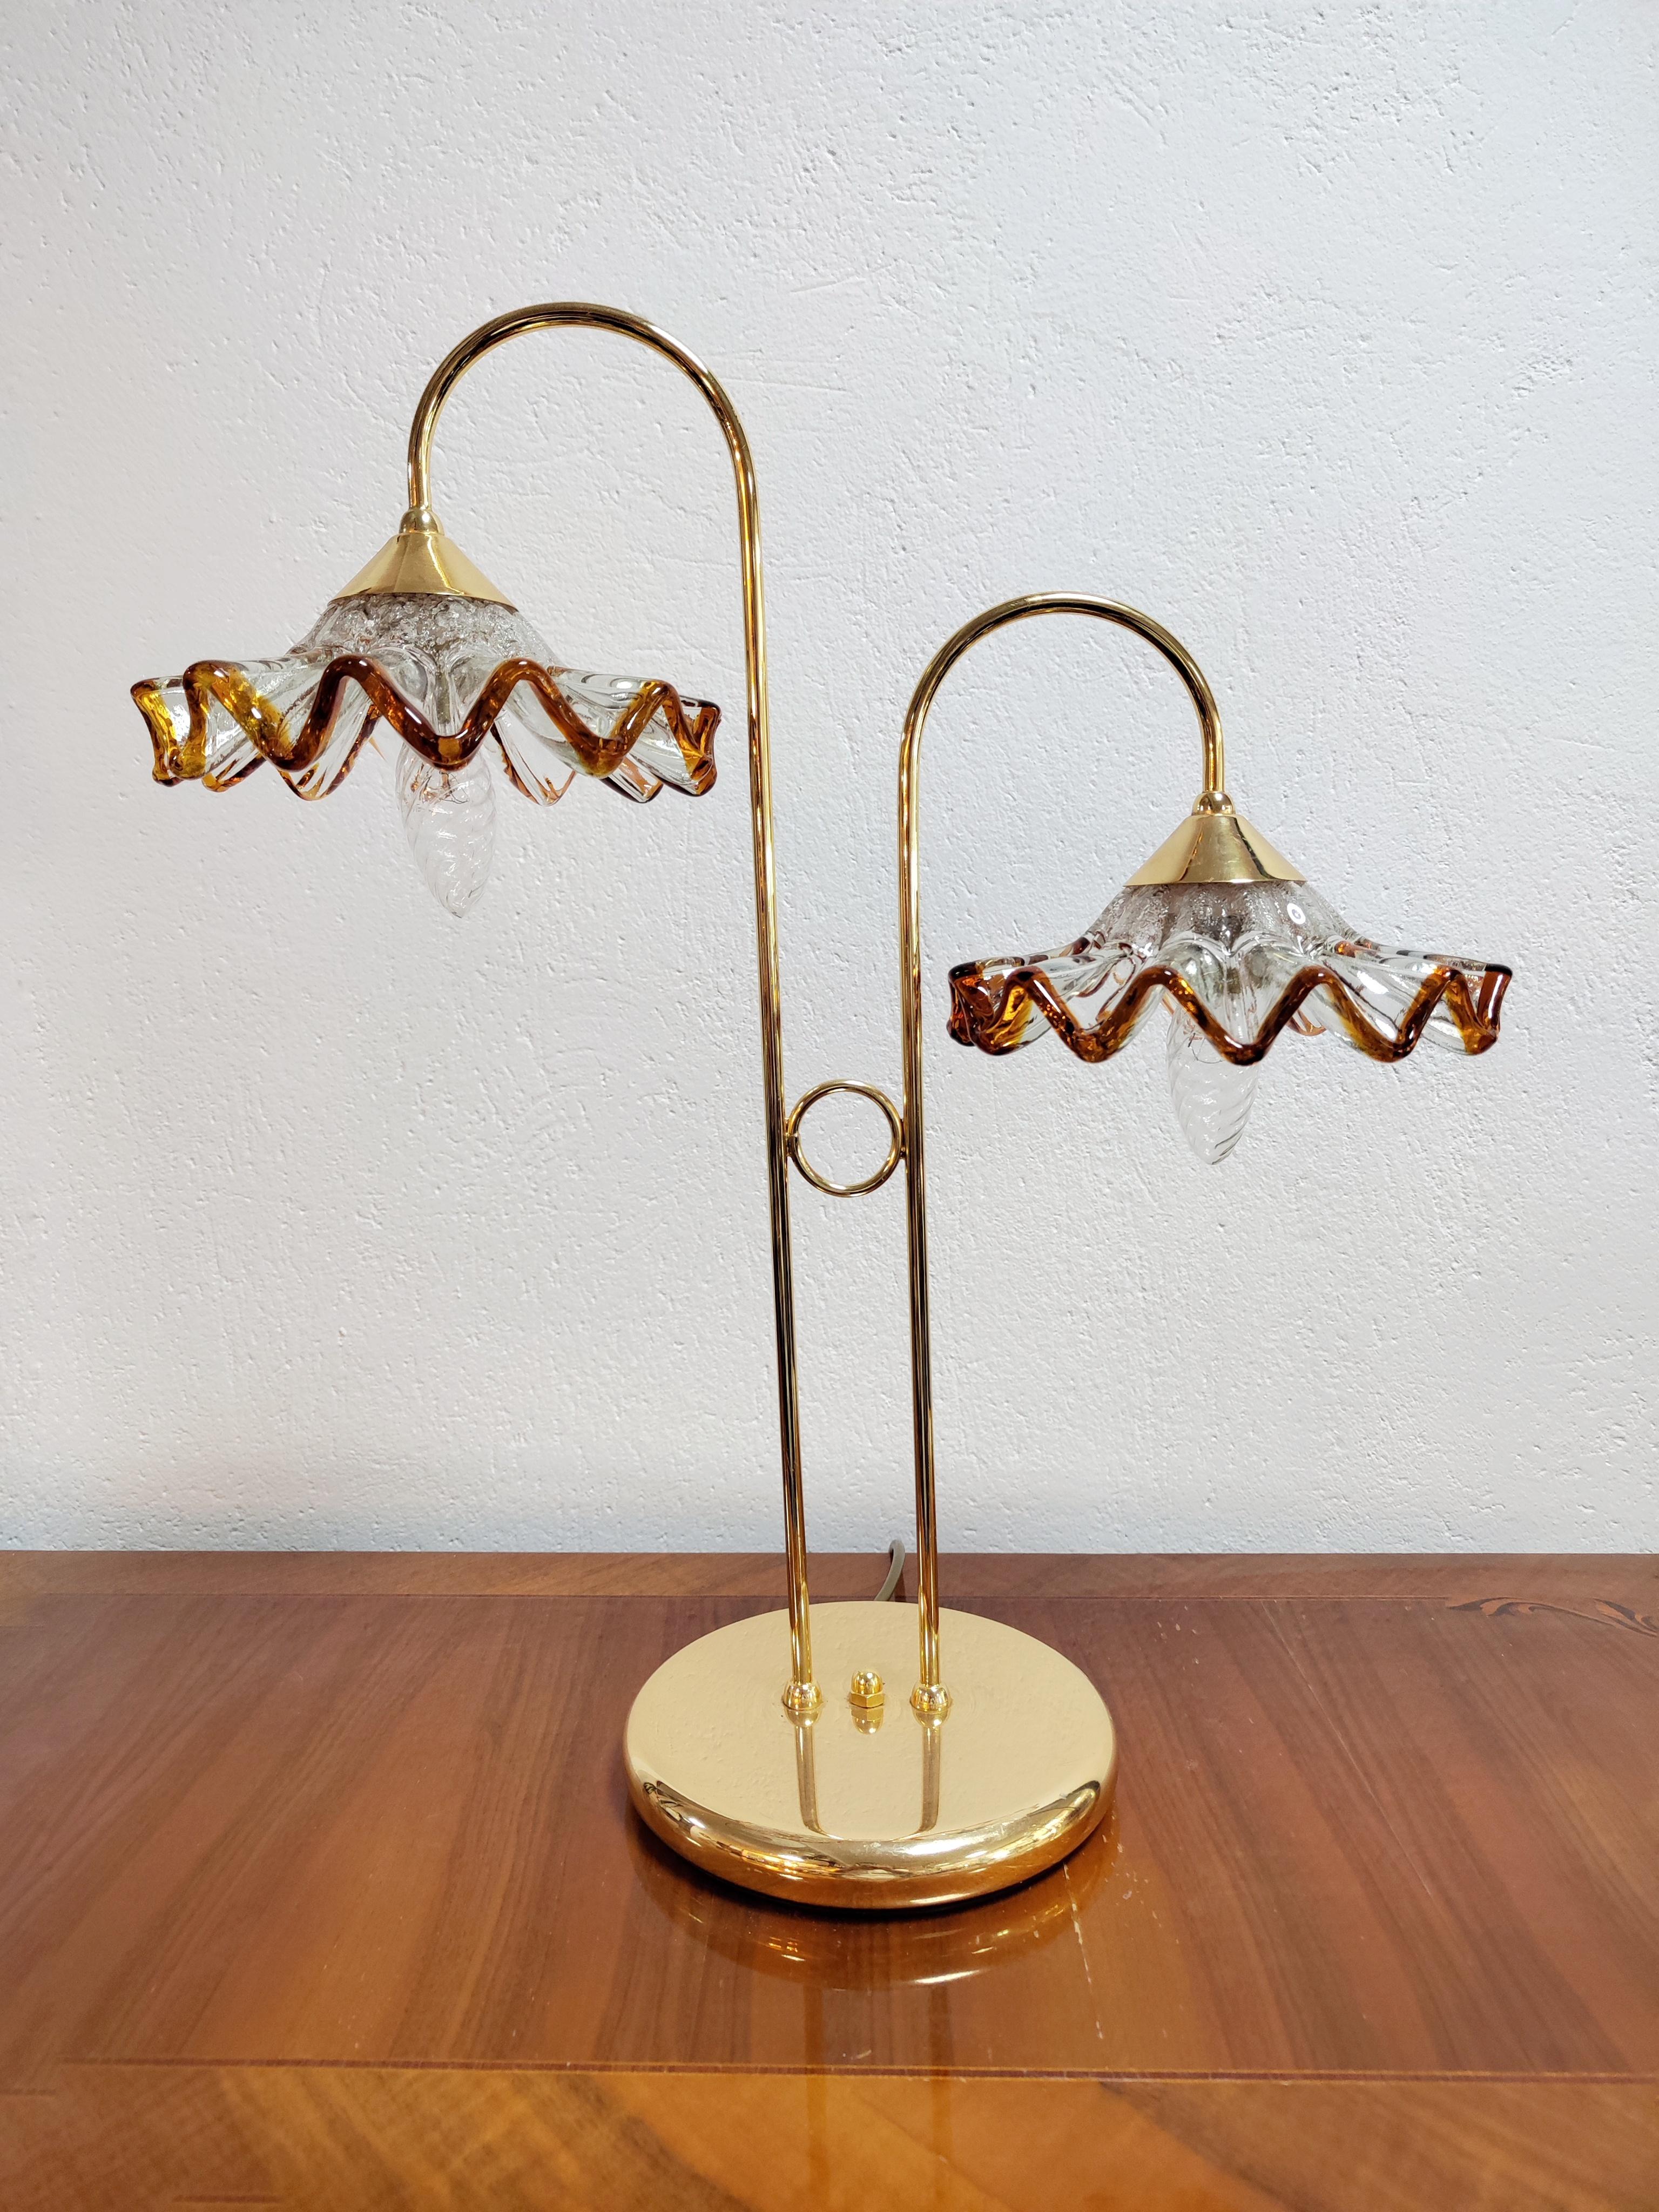 Italian Mid Century Modern Table Lamp with Murano Glass Shades by Mazzega, Italy 1970s  For Sale